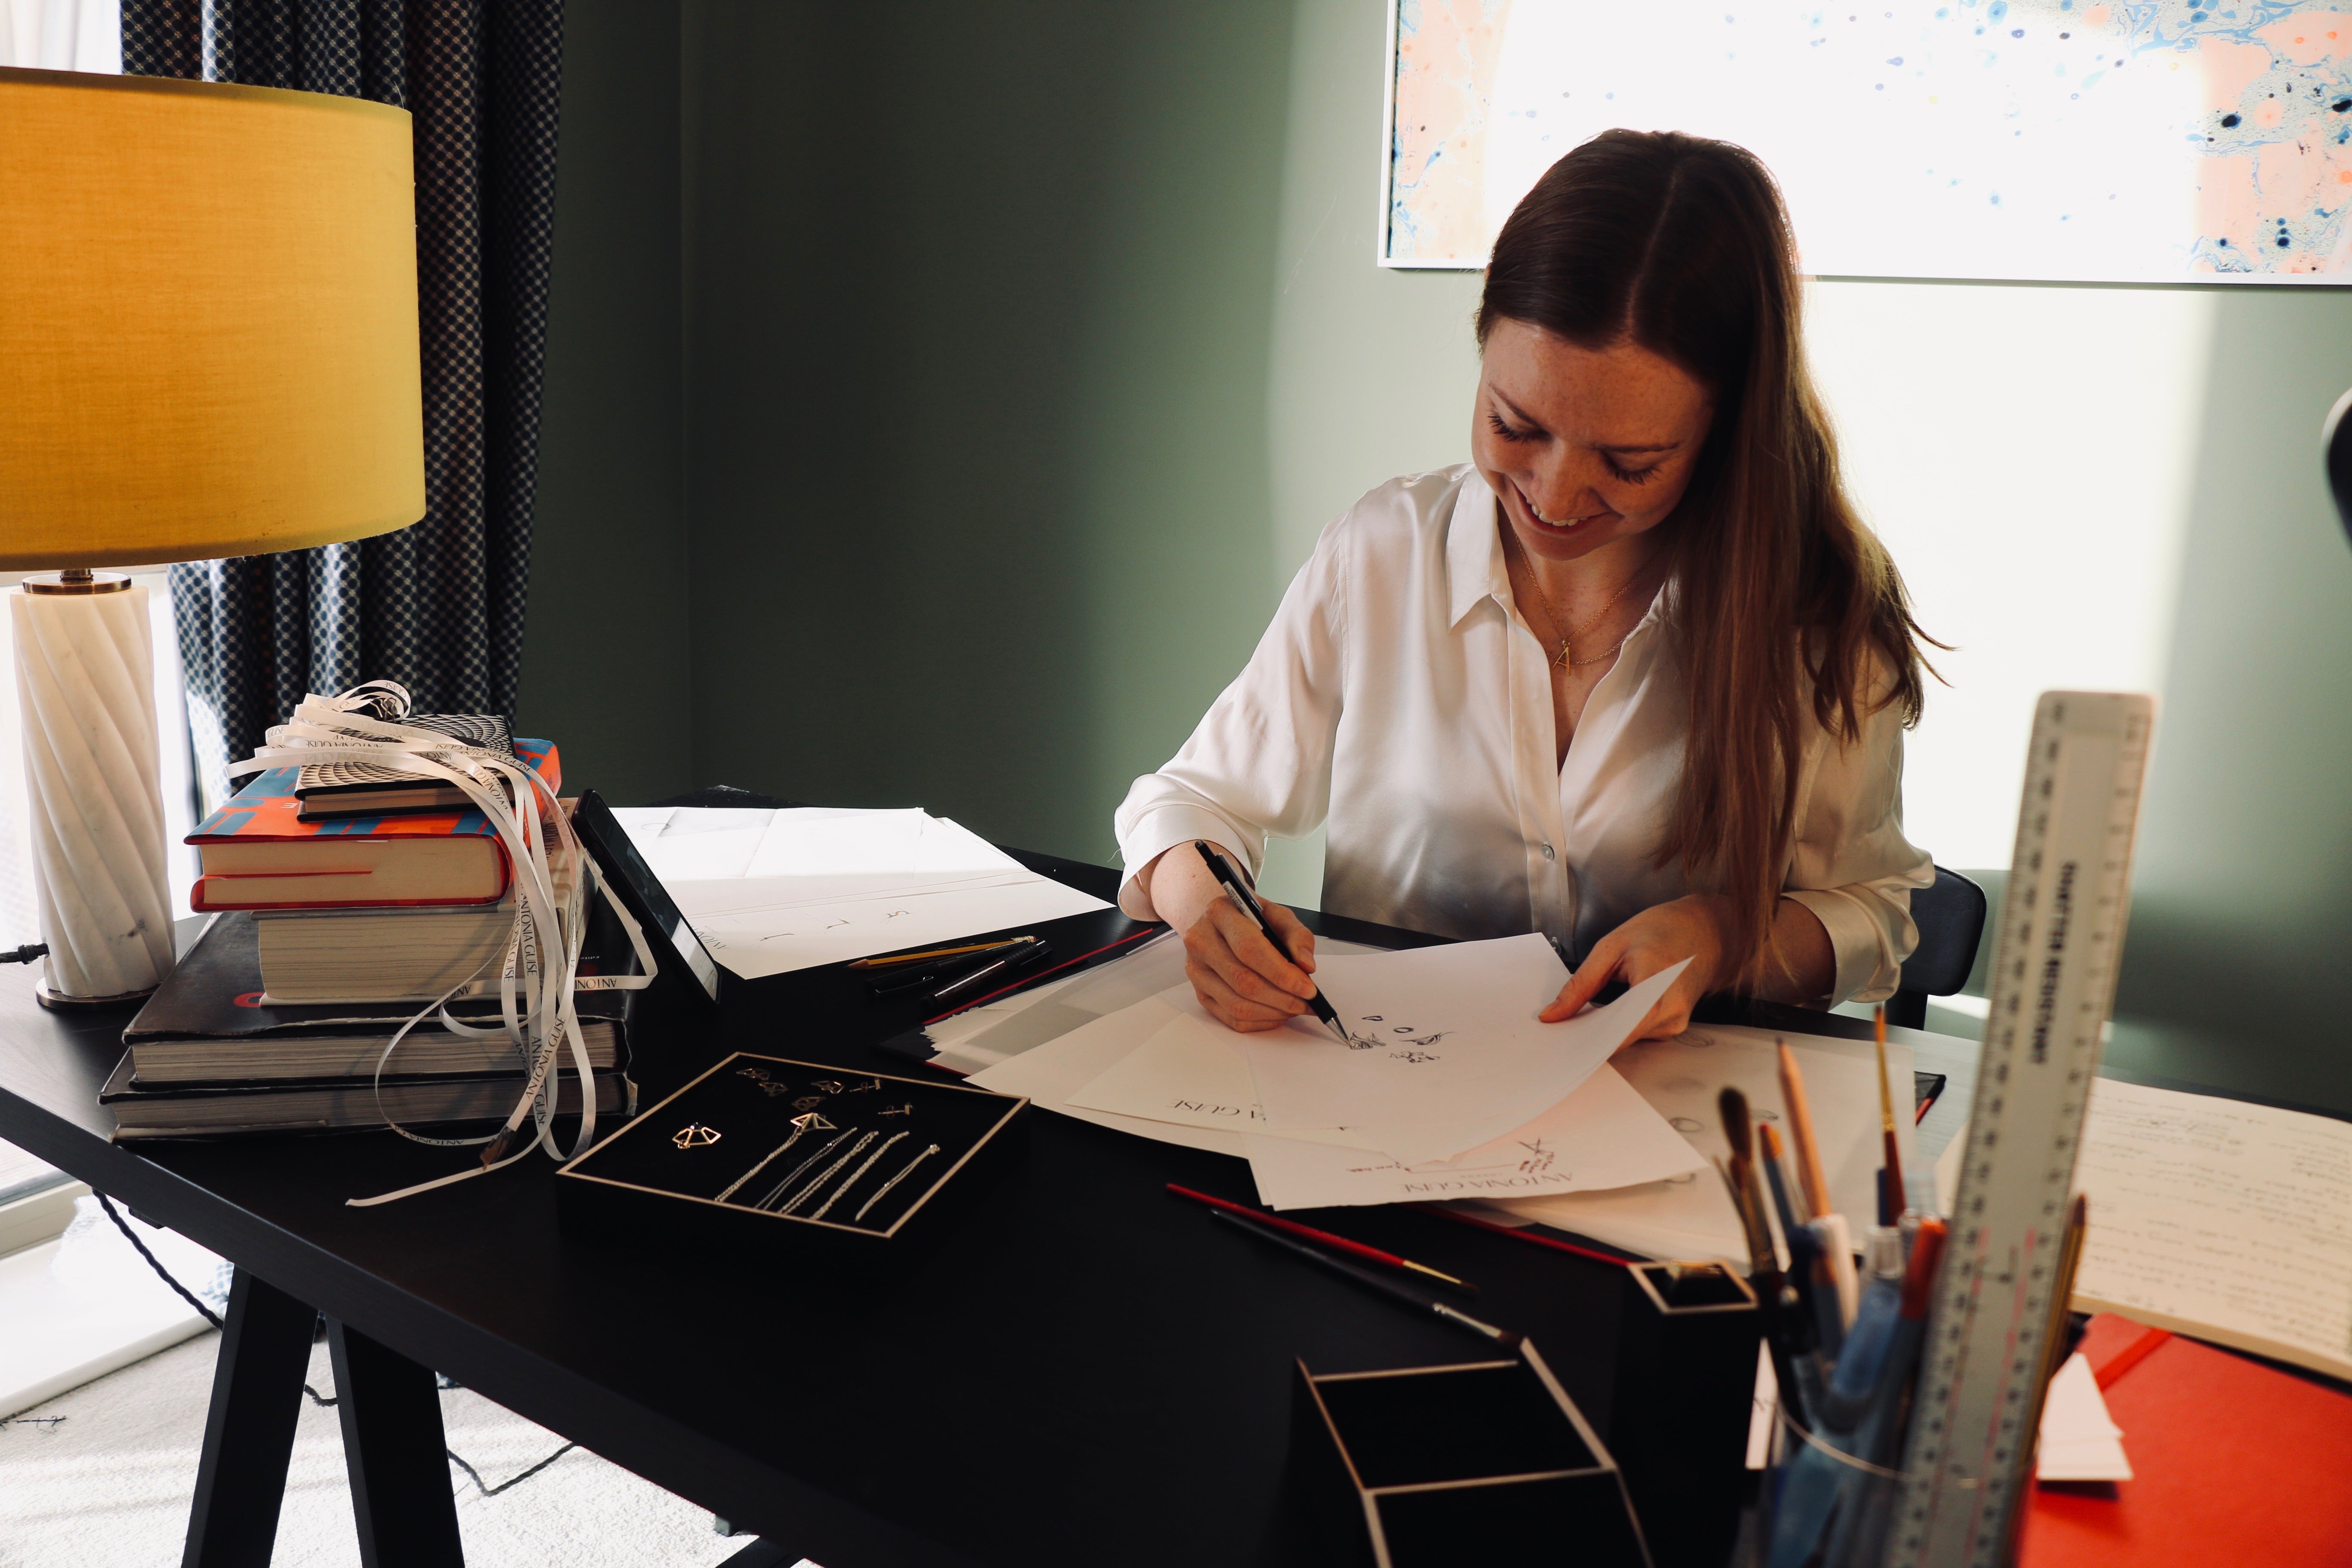 Image of our Founder and Designer Antonia Designing at her desk wearing a white silk shirt and Antonia Guise gold vermeil peices